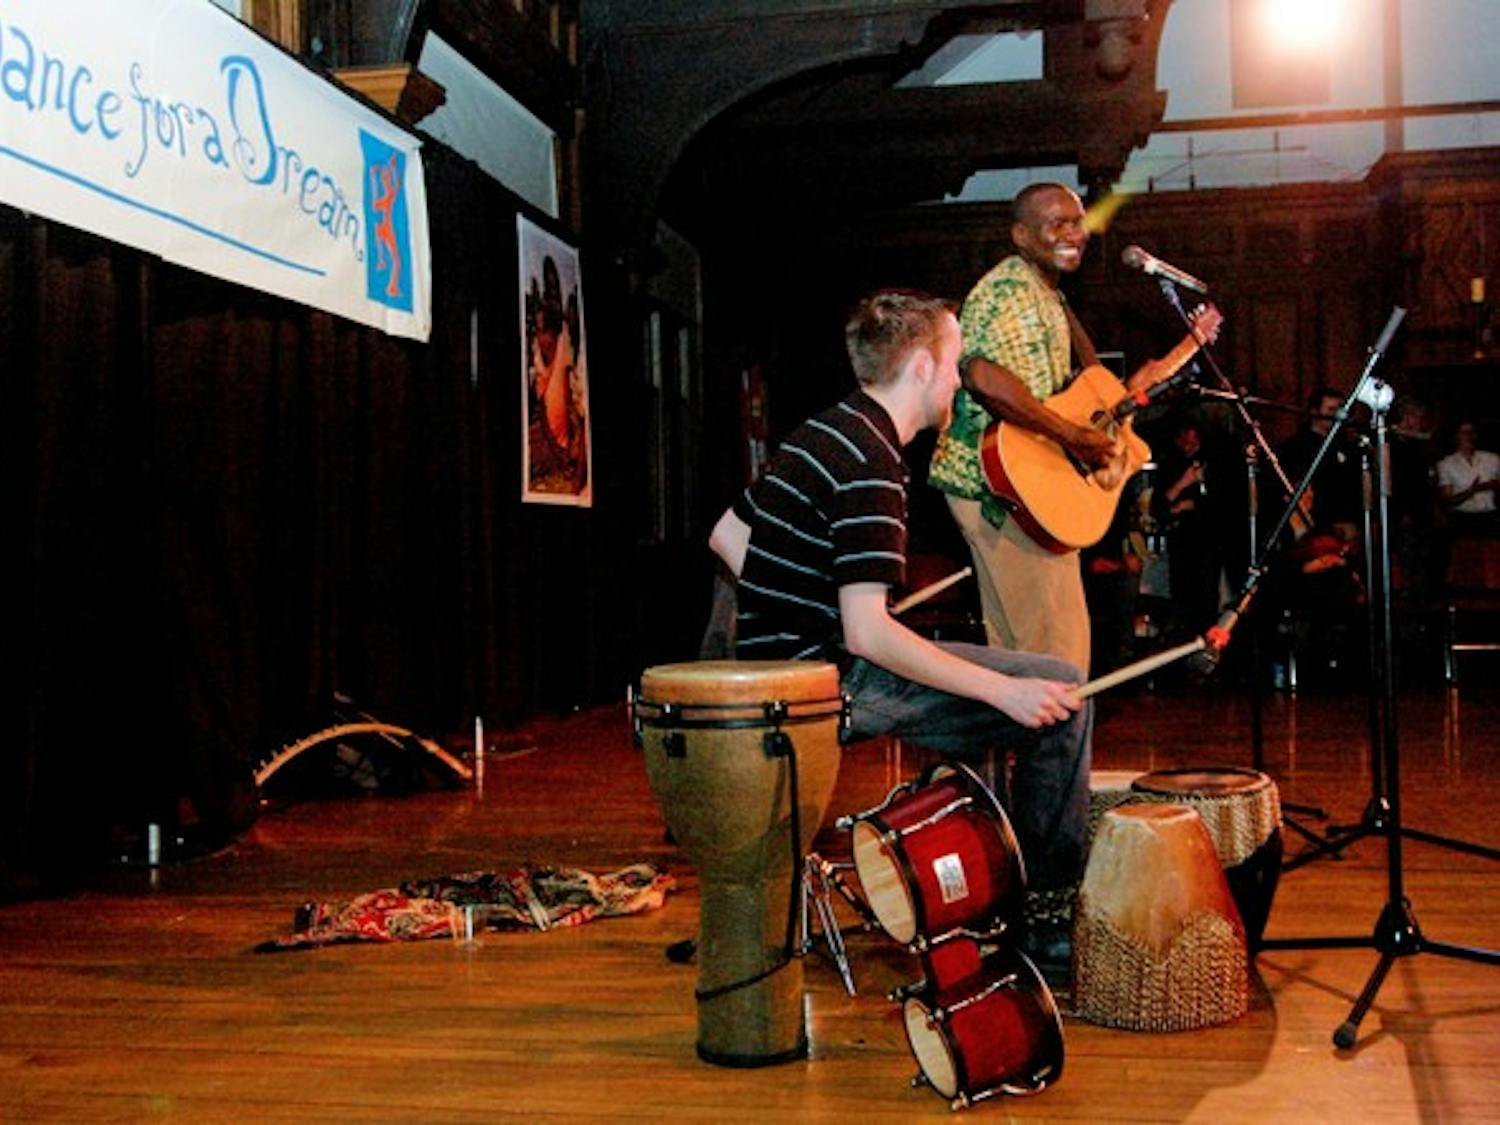 The Dance for a Dream event, held in Collis Commonground on Saturday, benefited the Lwala Community Alliance, a non-profit organization that funds the Lwala clinic in Kenya, founded by Milton Ochieng '04 and Fred Ochieng '05.